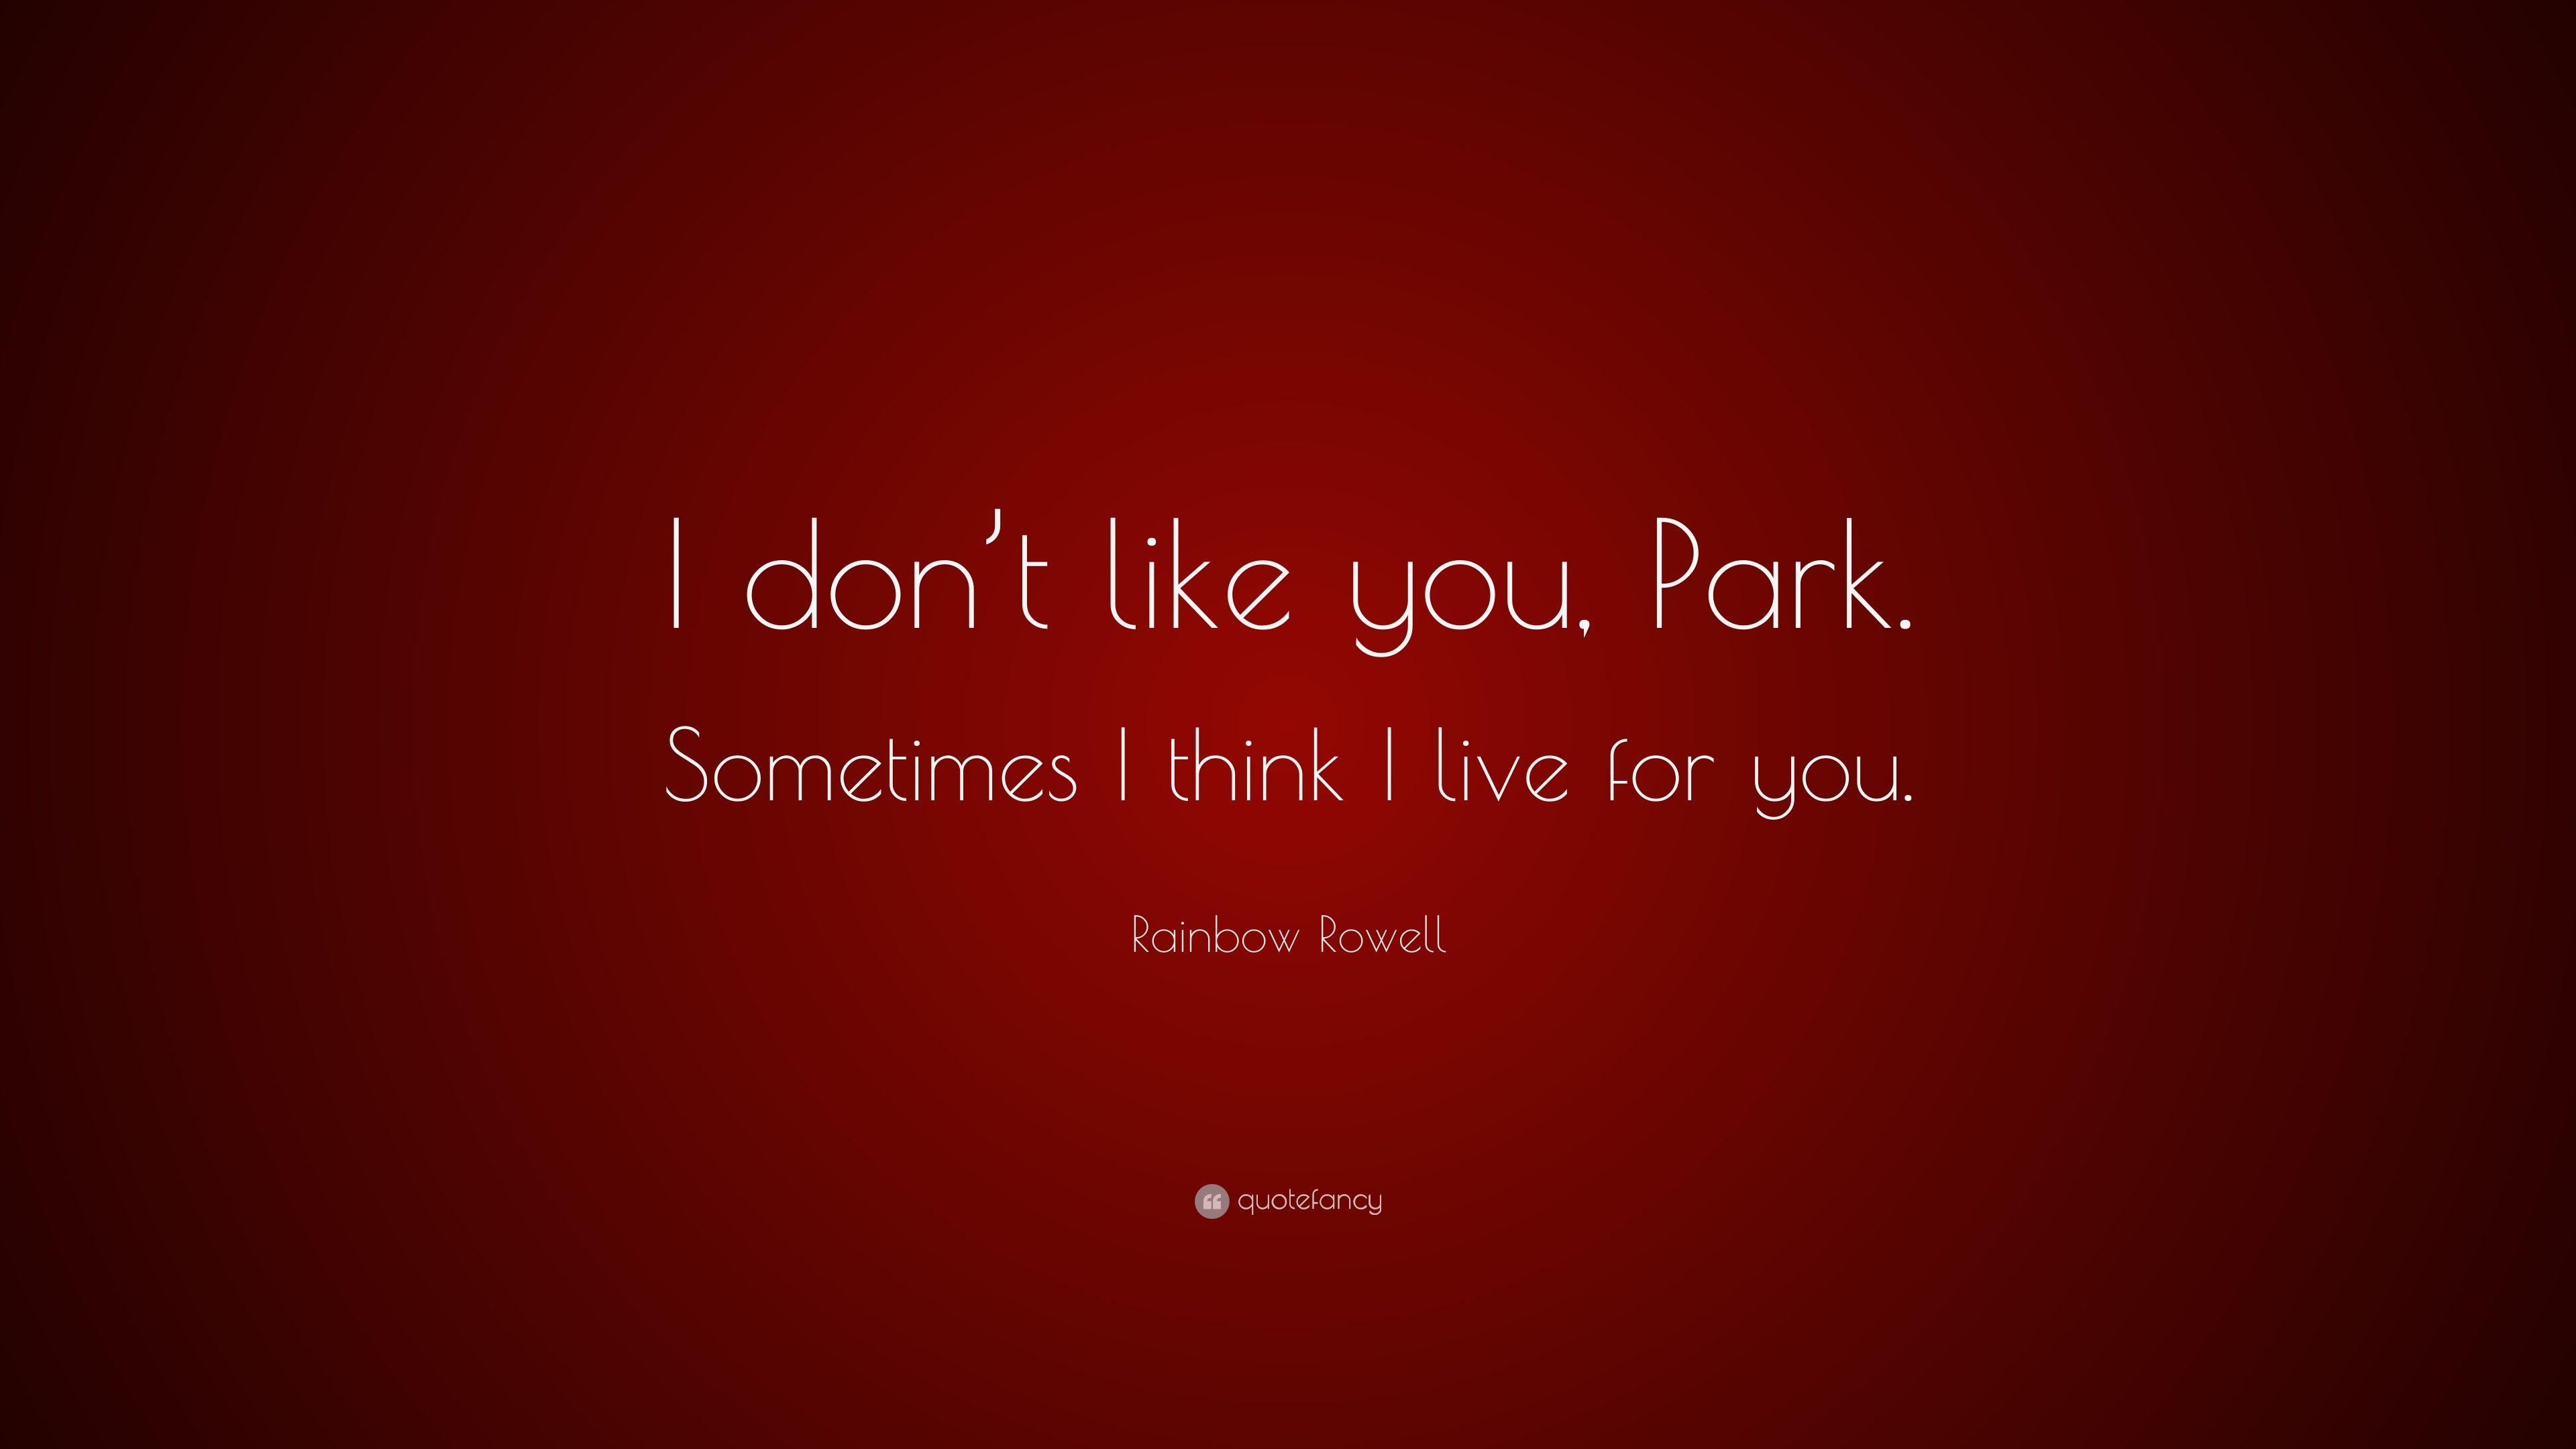 Rainbow Rowell Quote: “I don't like you, Park. Sometimes I think I